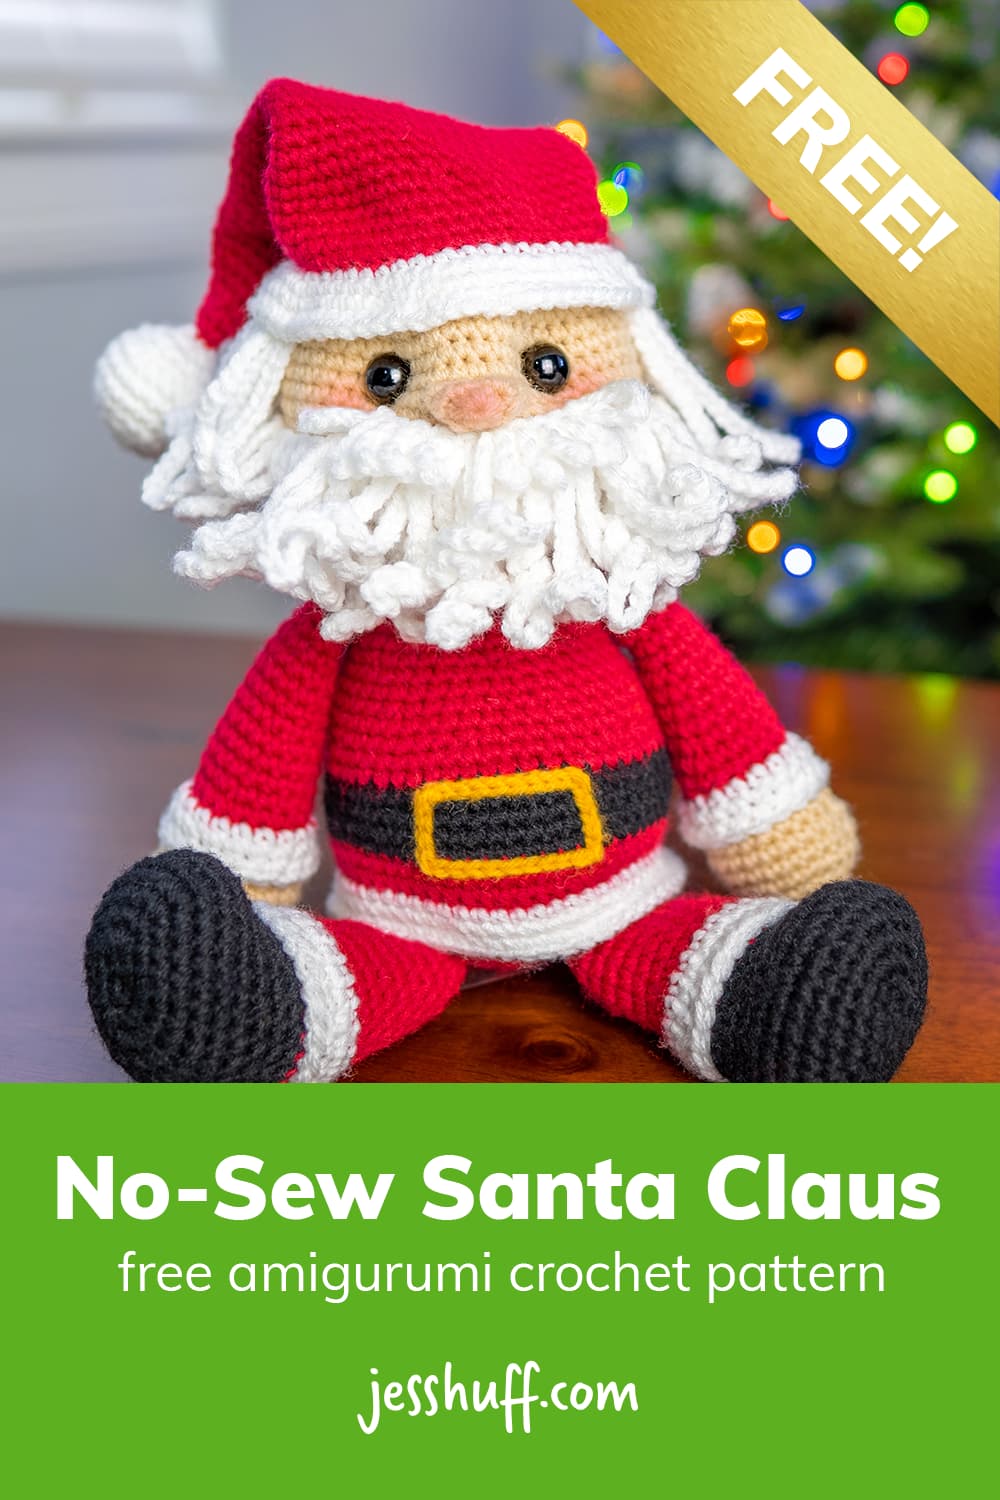 This no-sew amigurumi crochet pattern is available for free! Santa stands 16" tall when crocheted with worsted weight yarn and a 3.5mm hook. via @heyjesshuff